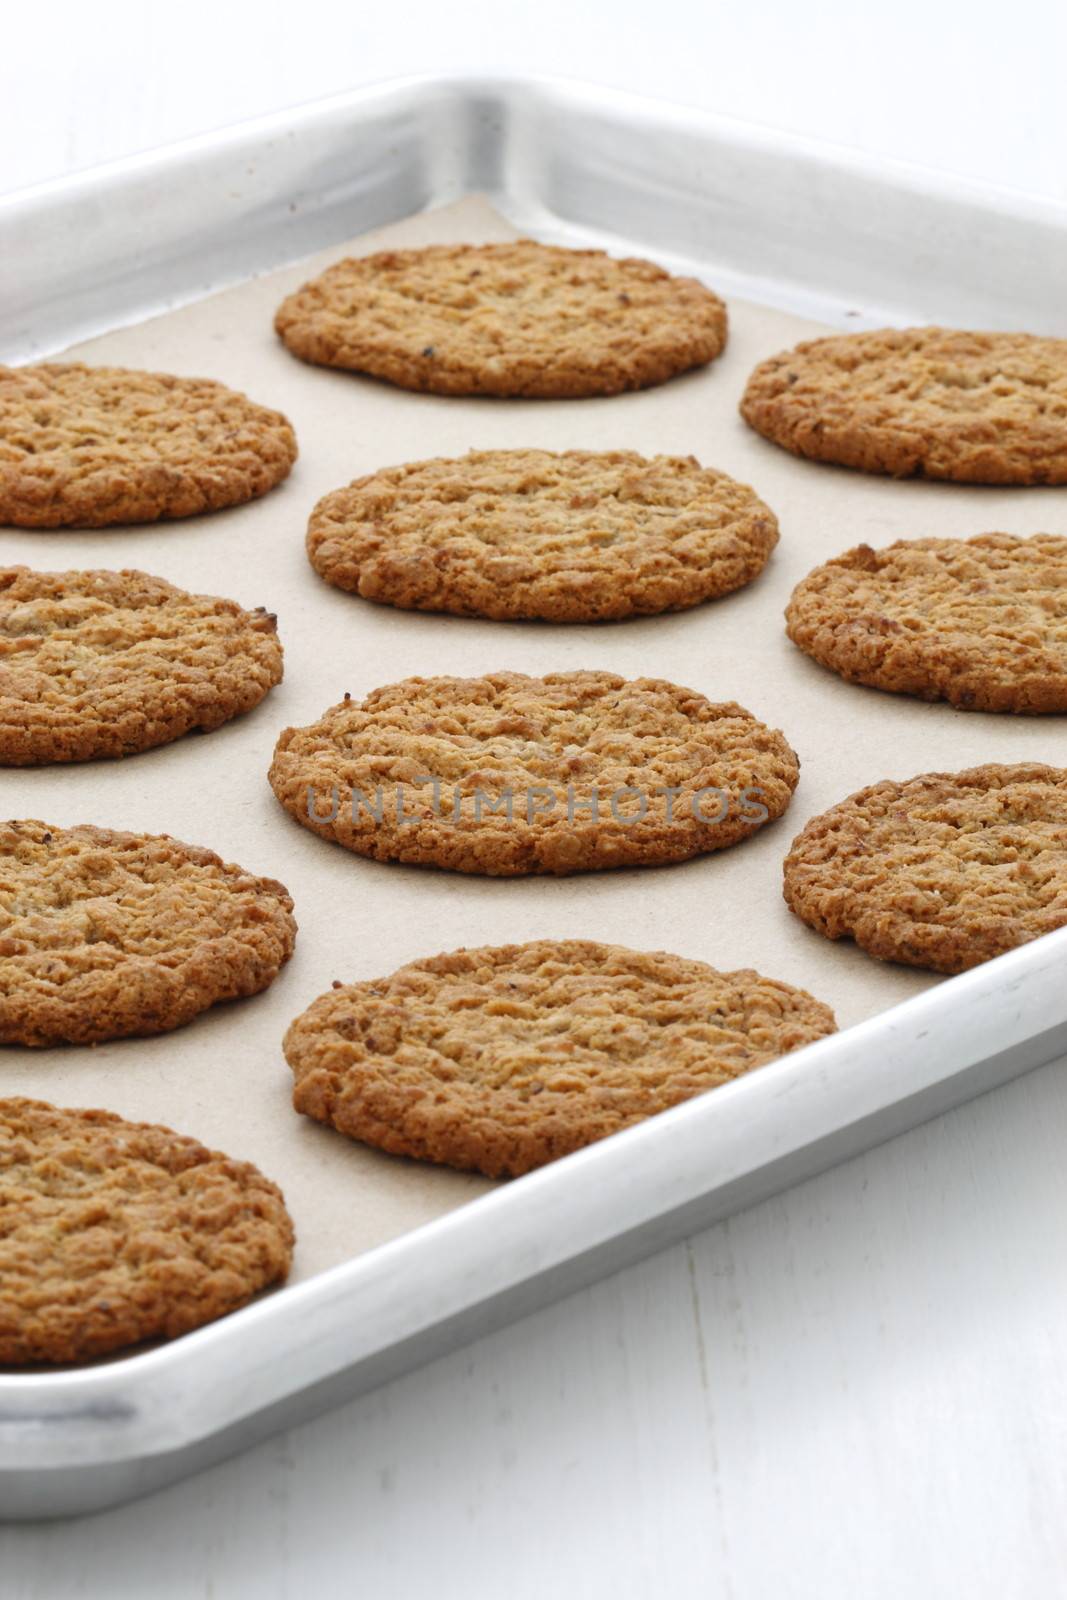 Fresh baked oatmeal cookies by tacar